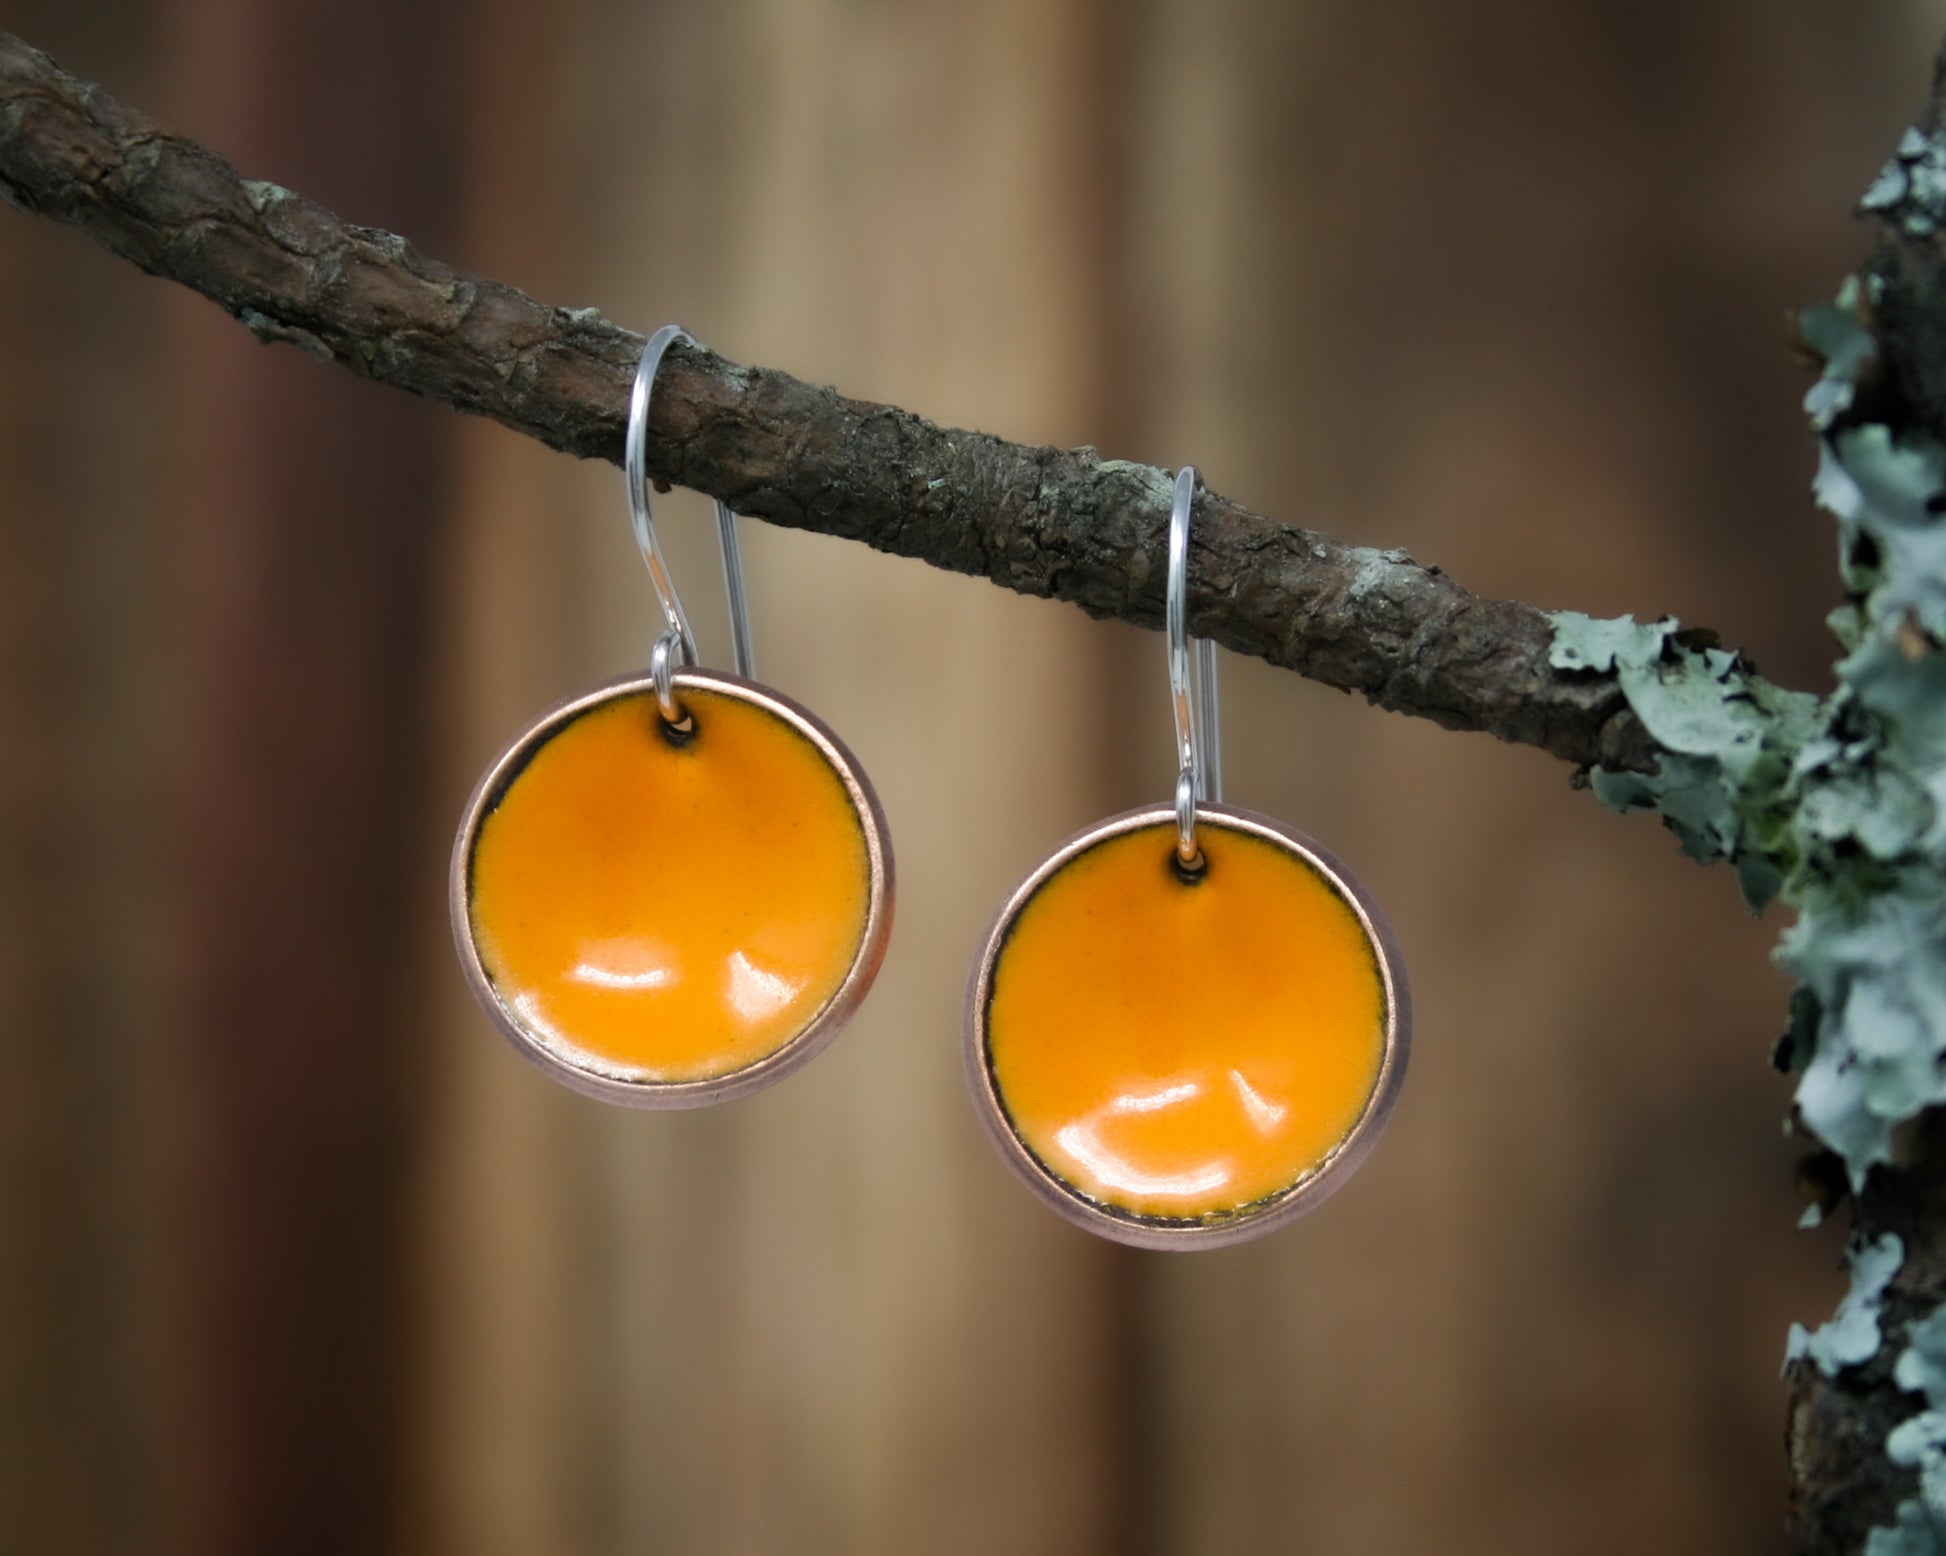 a pair of orange earrings hanging from a tree branch